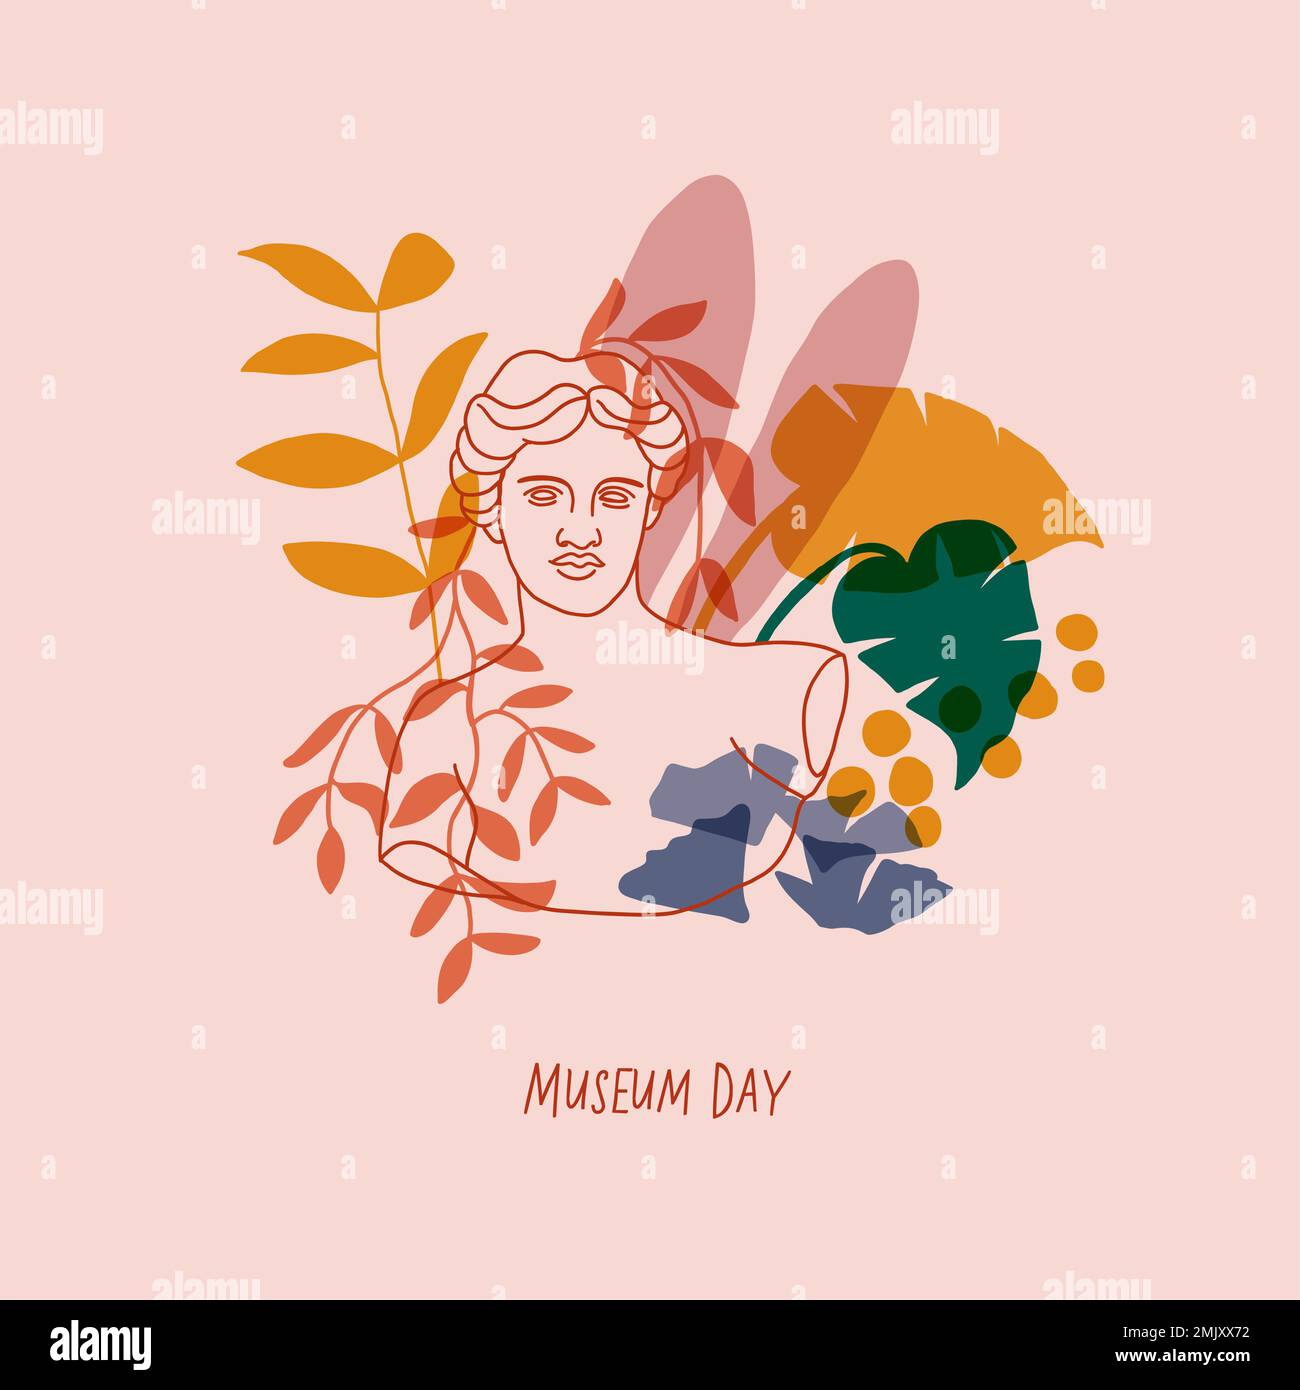 Statue of Renaissance woman with flowers. Minimalistic illustration. Pink background. Museum day postcard, banner. Museum illustration. Vector illustration Stock Vector